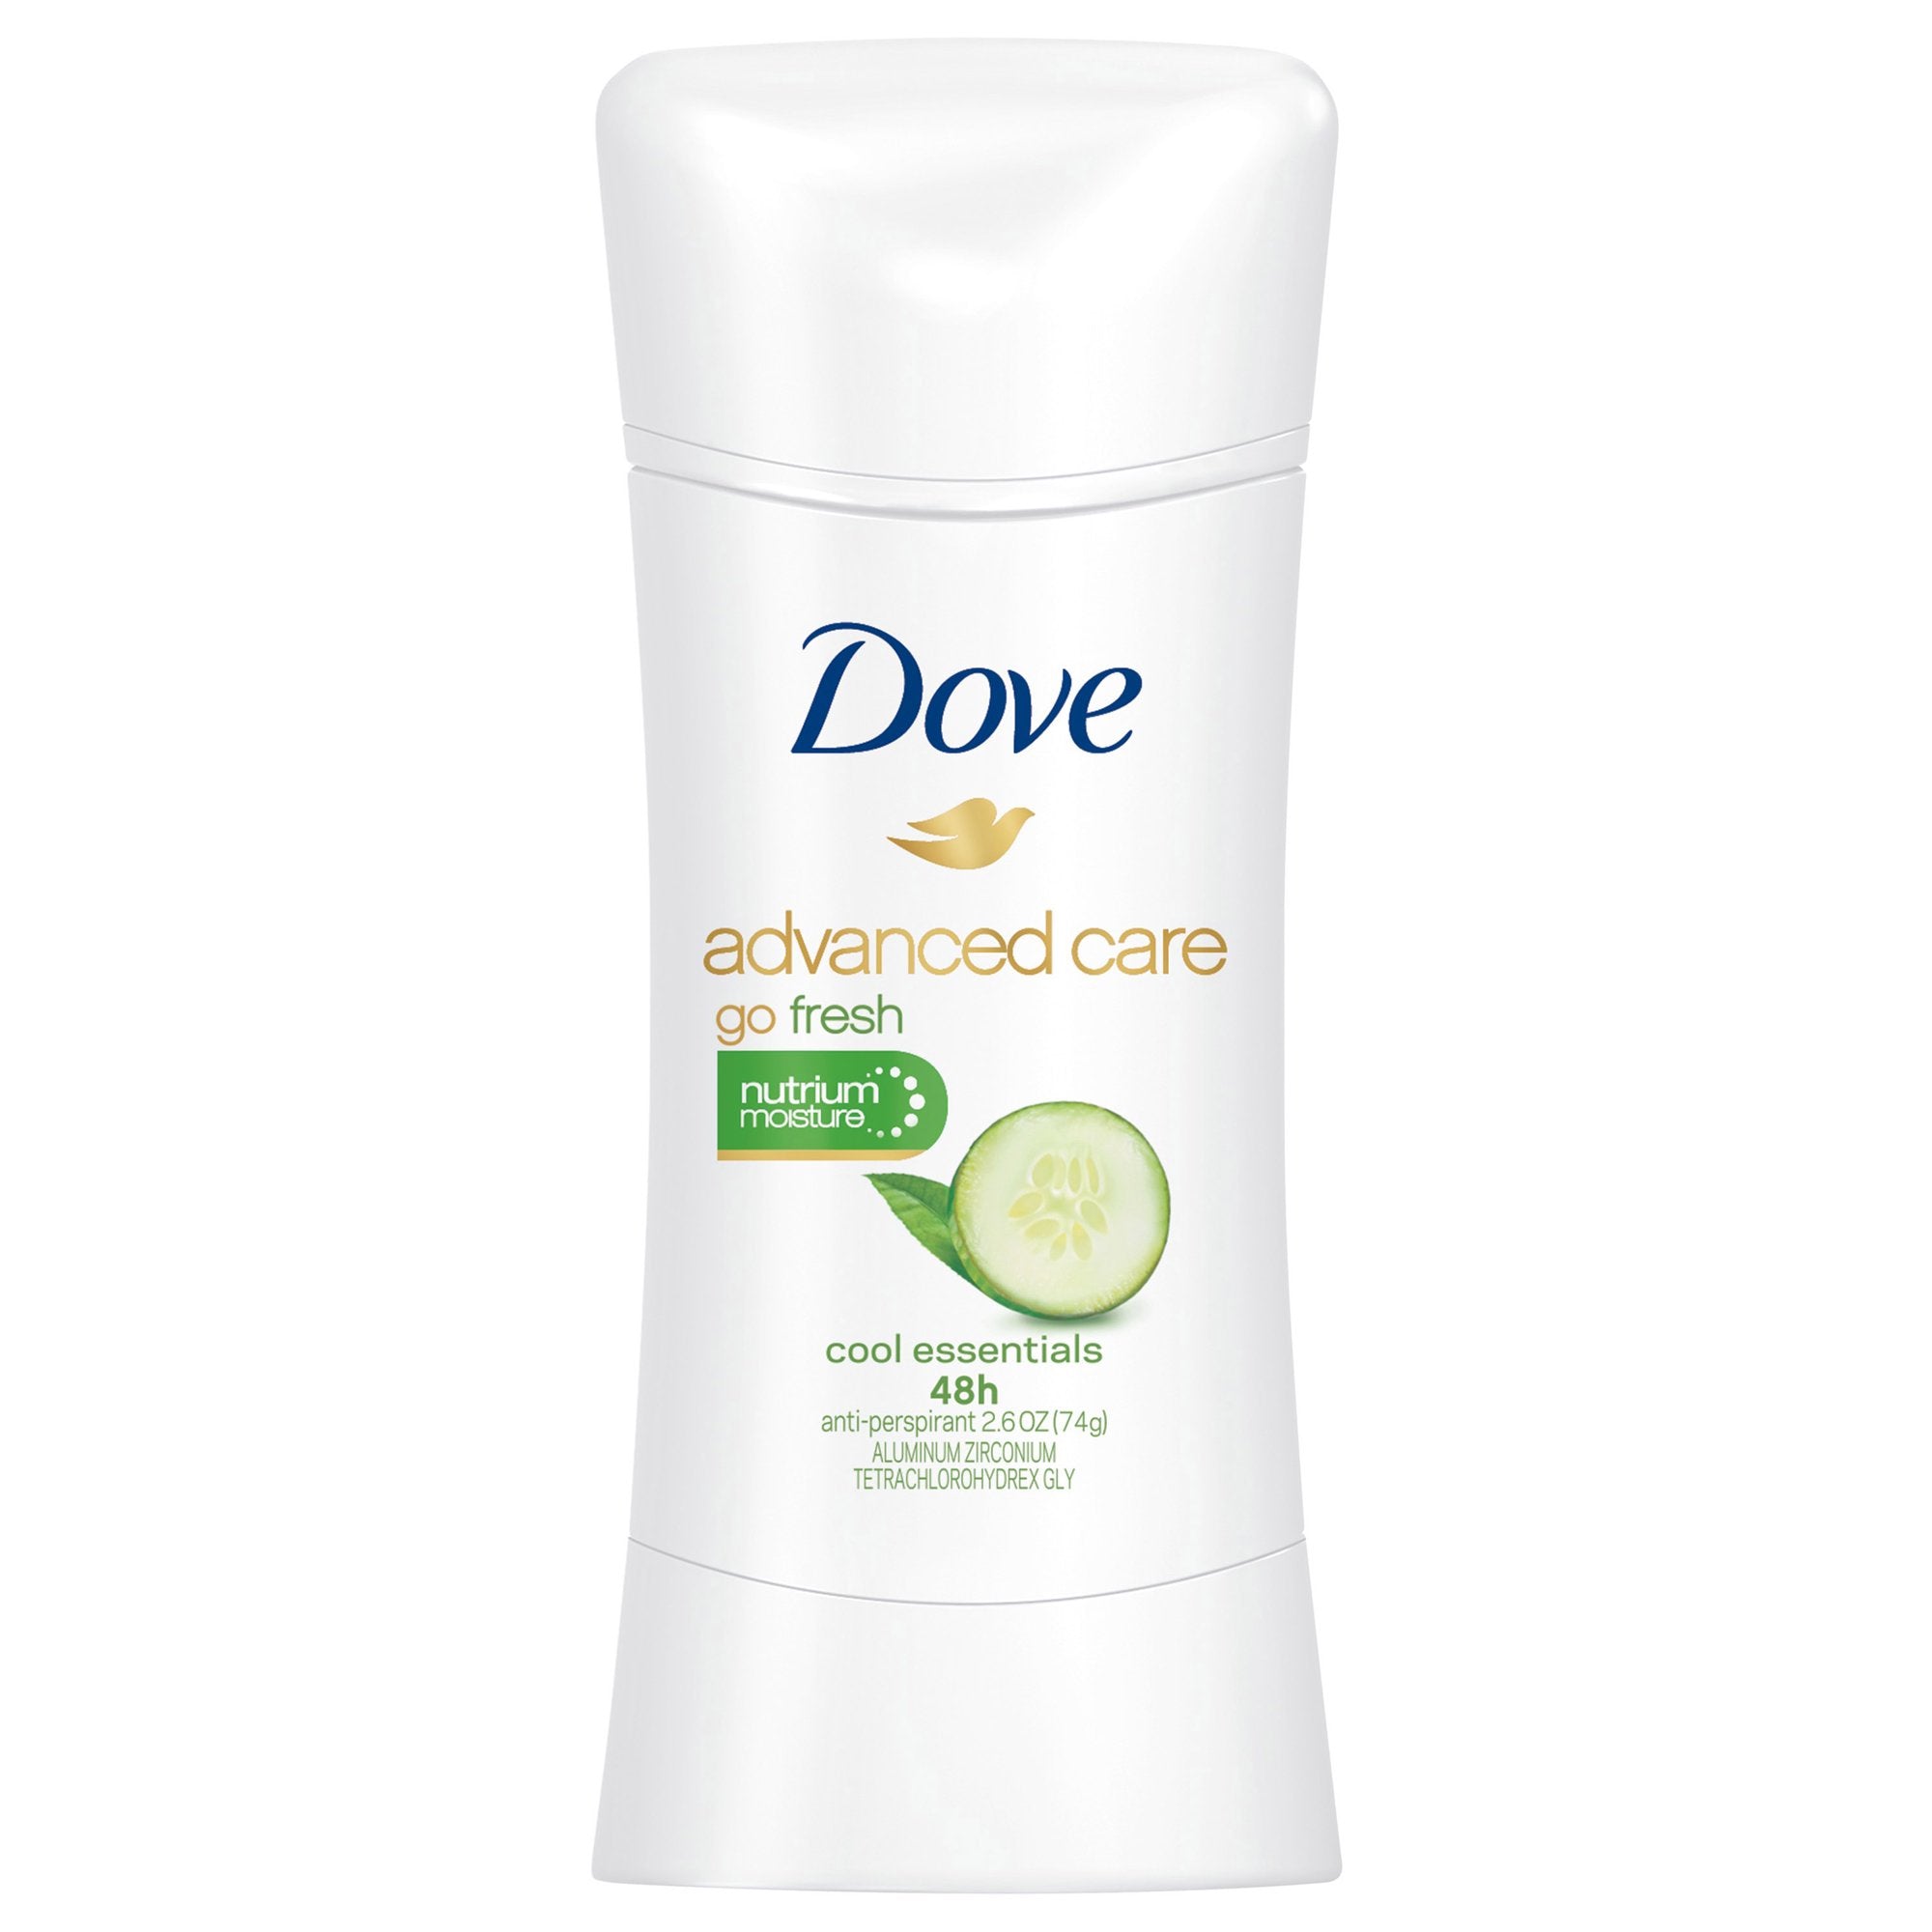 Dove Antiperspirant Deodorant with 48 Hour Protection - Atténuer les odeurs corporelles